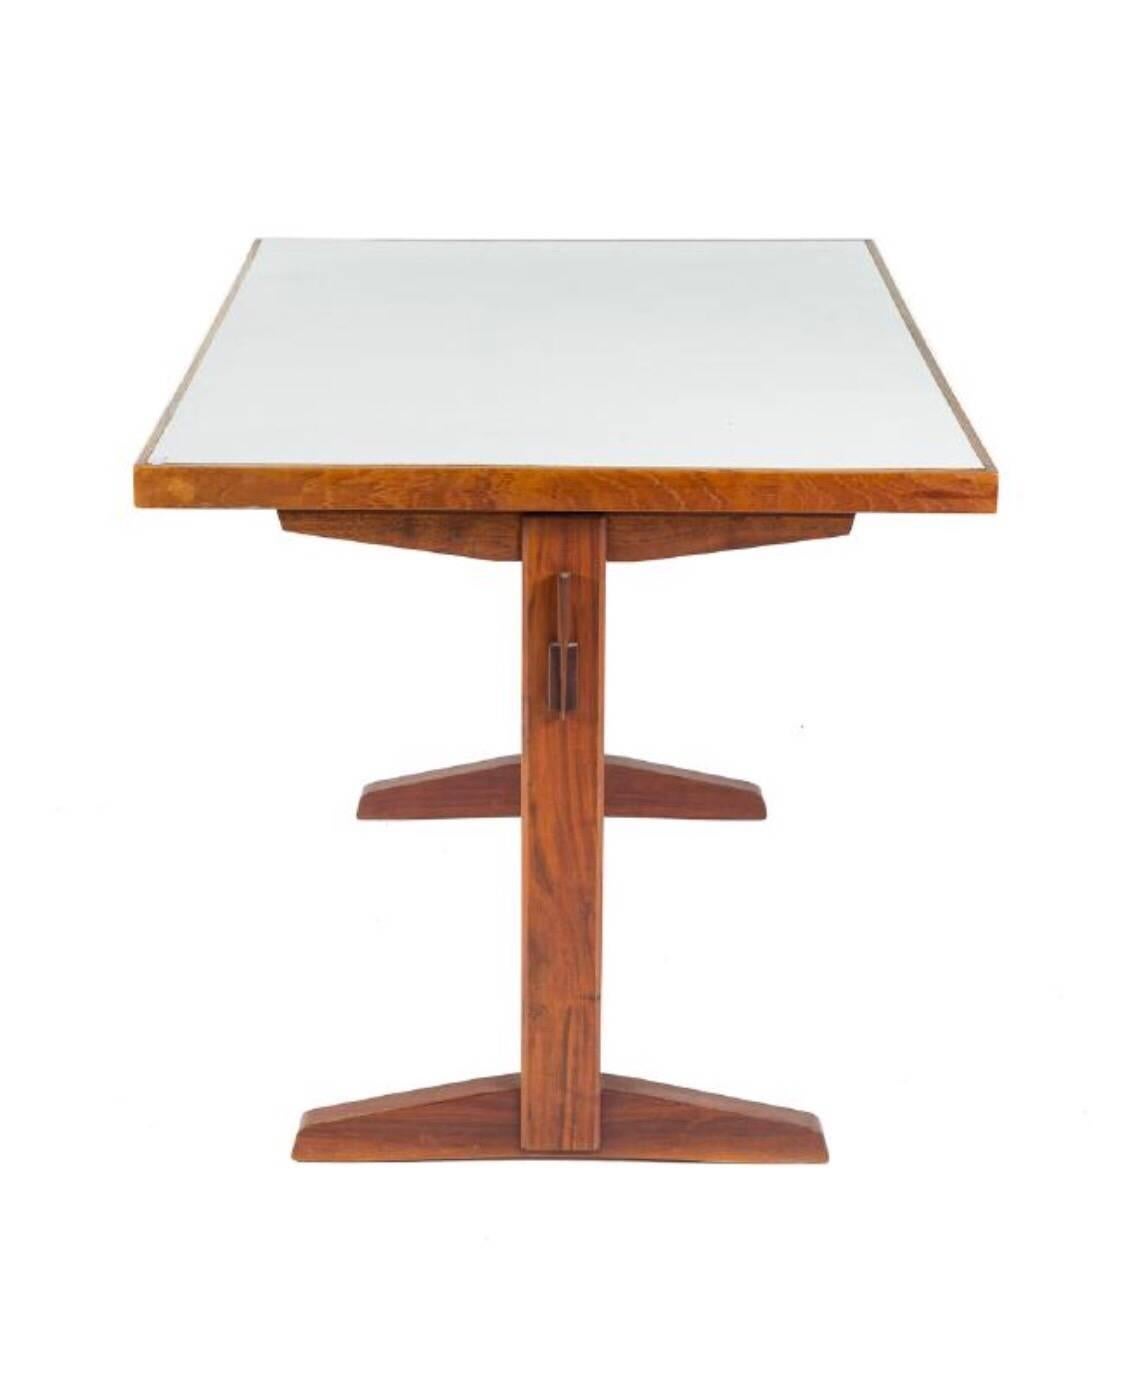 George Nakashima walnut table base with custom laminate top added by owner. Authenticated by order card copy.